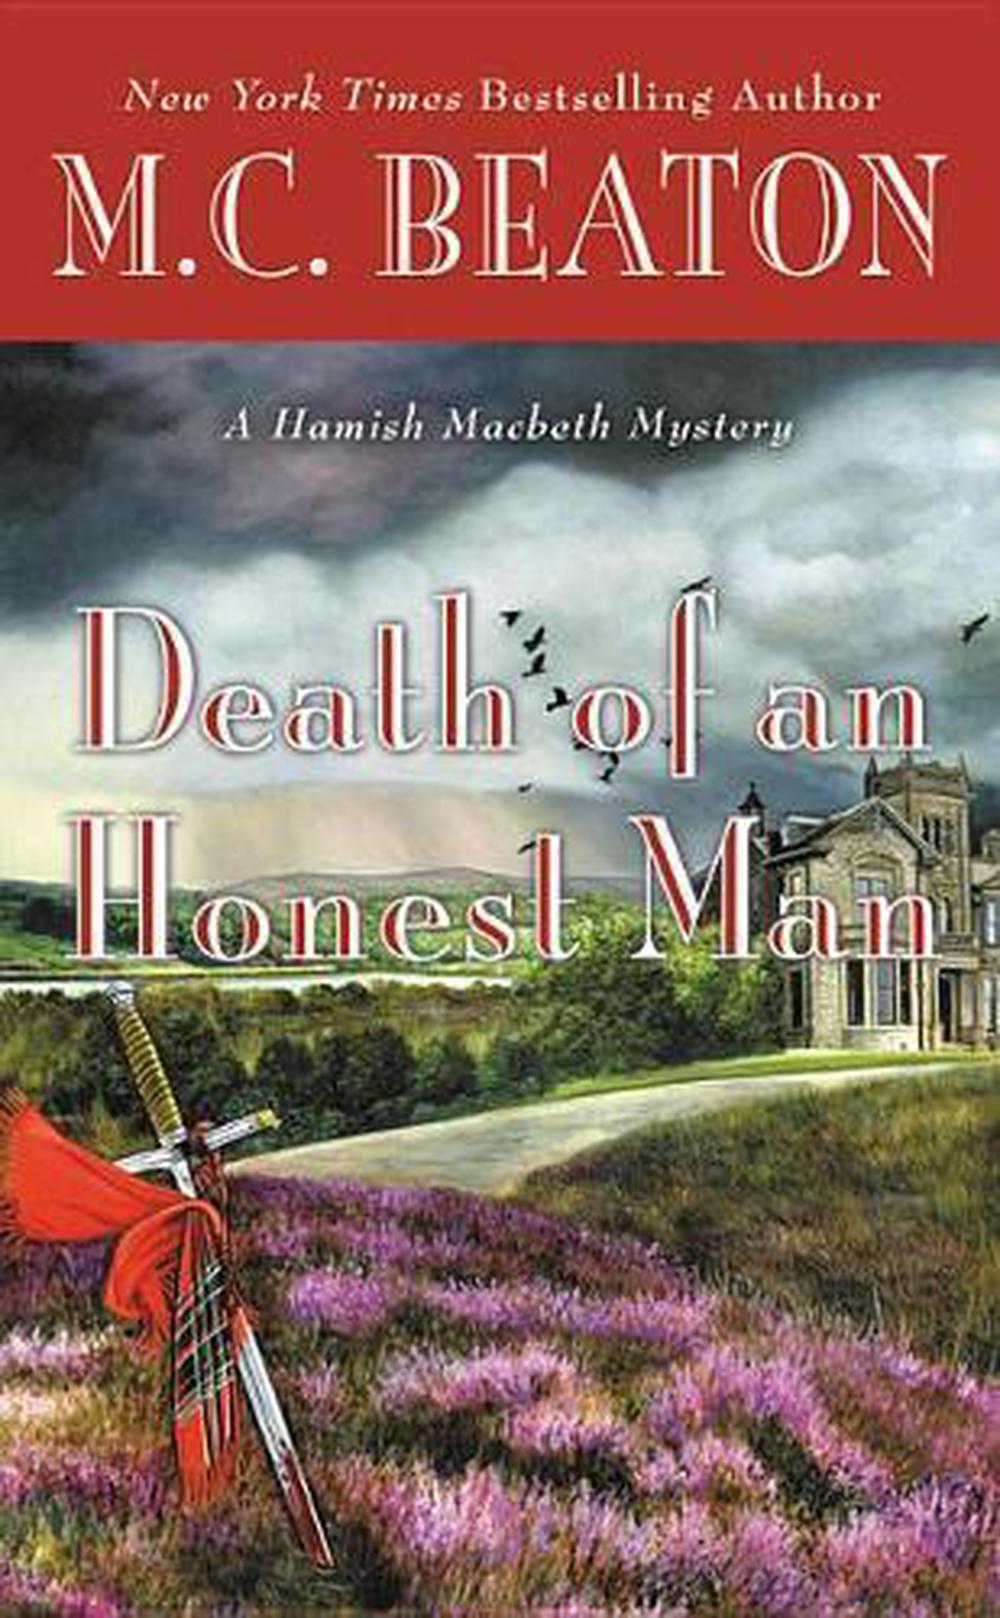 Death of An Honest Man by M.C. Beaton (English) Paperback